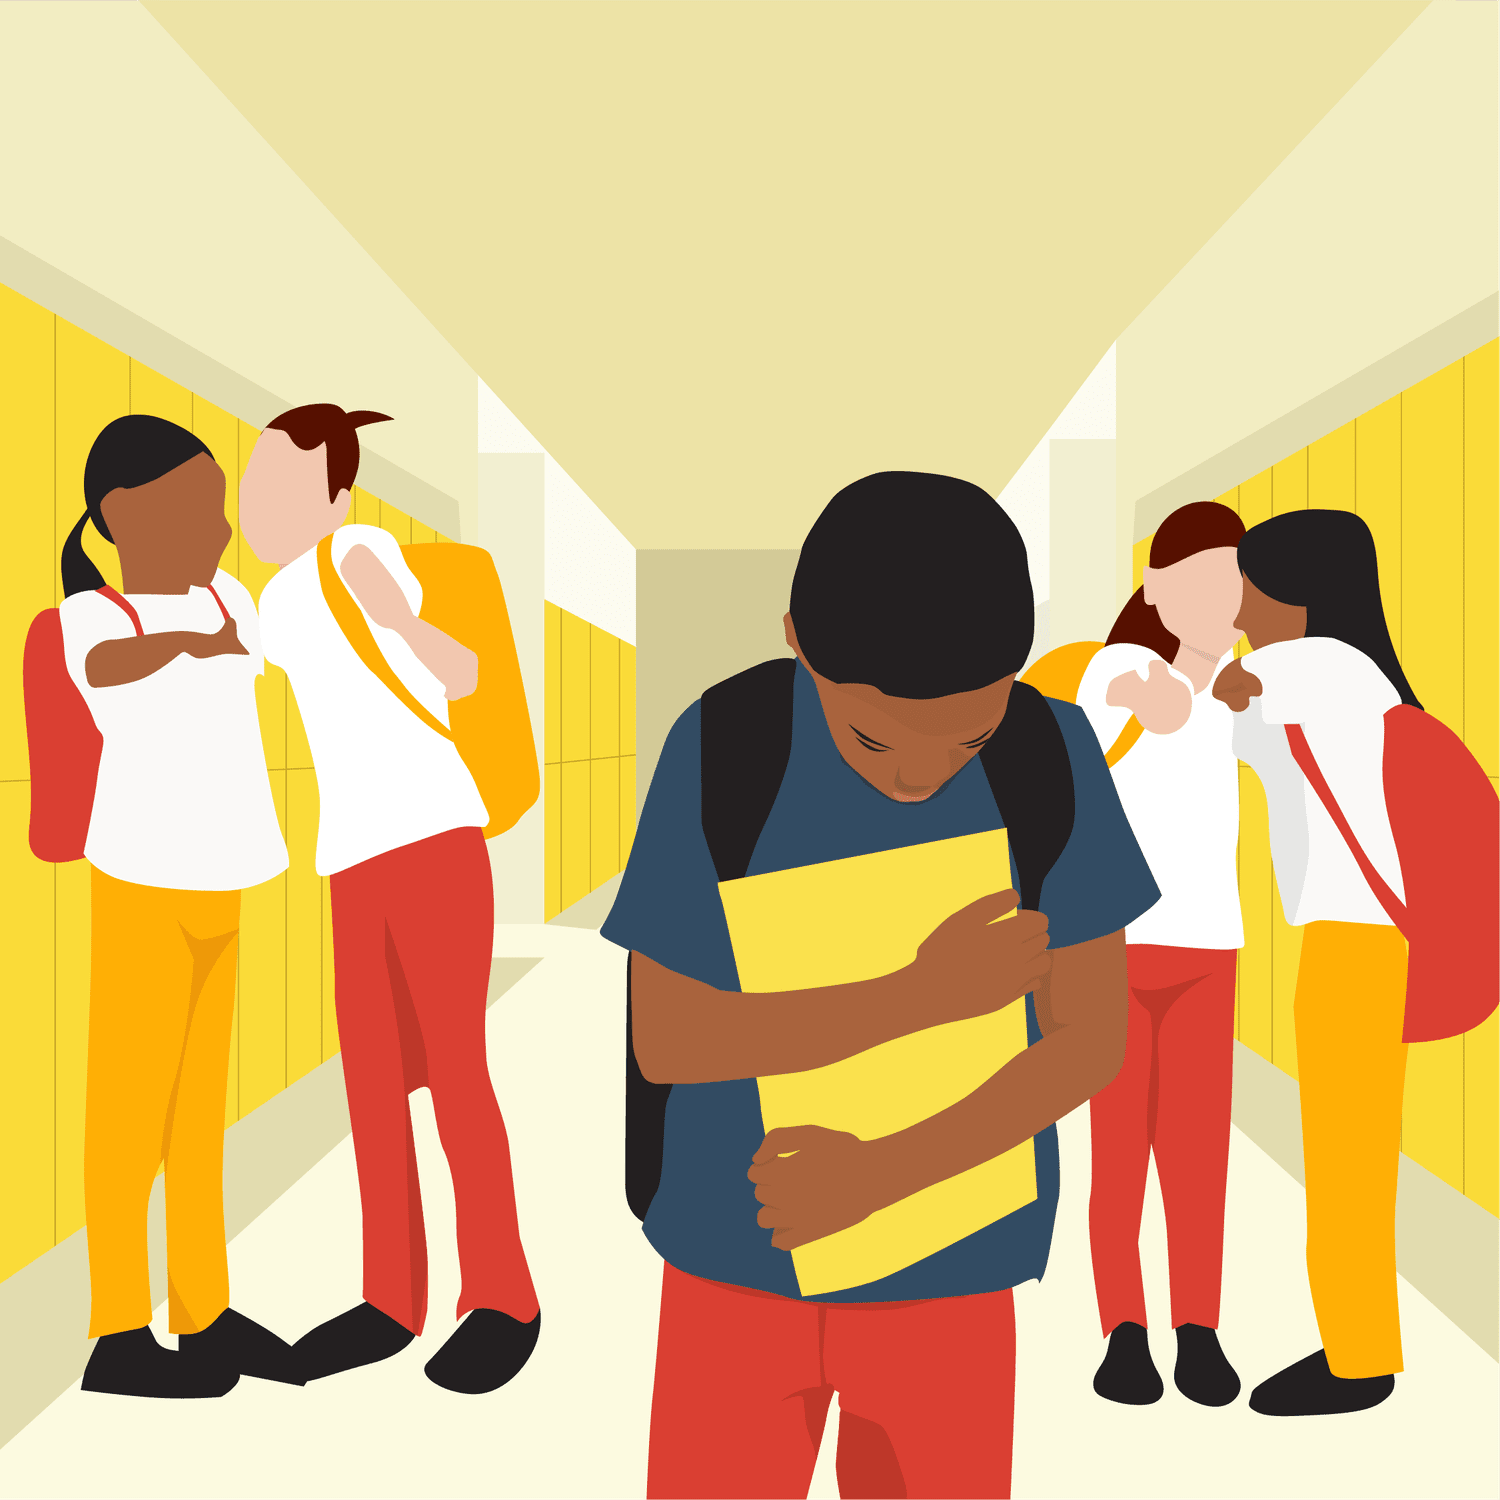 A Parent's Guide for How to Deal With Bullies